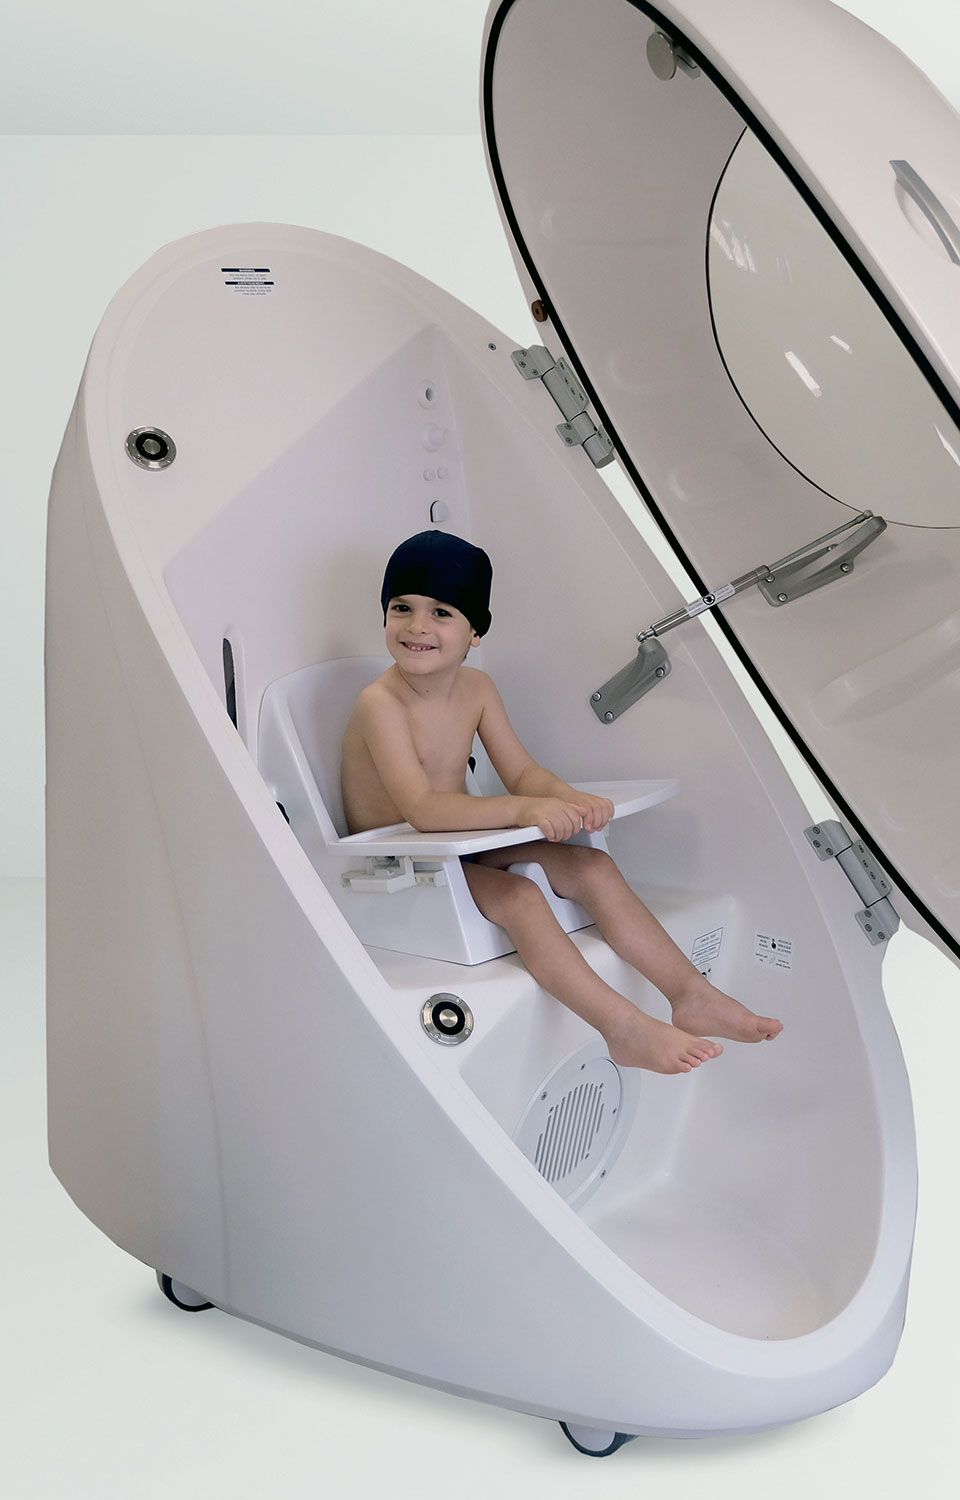 COSMED - BOD POD GS-X - Gold Standard in Body Composition analysis